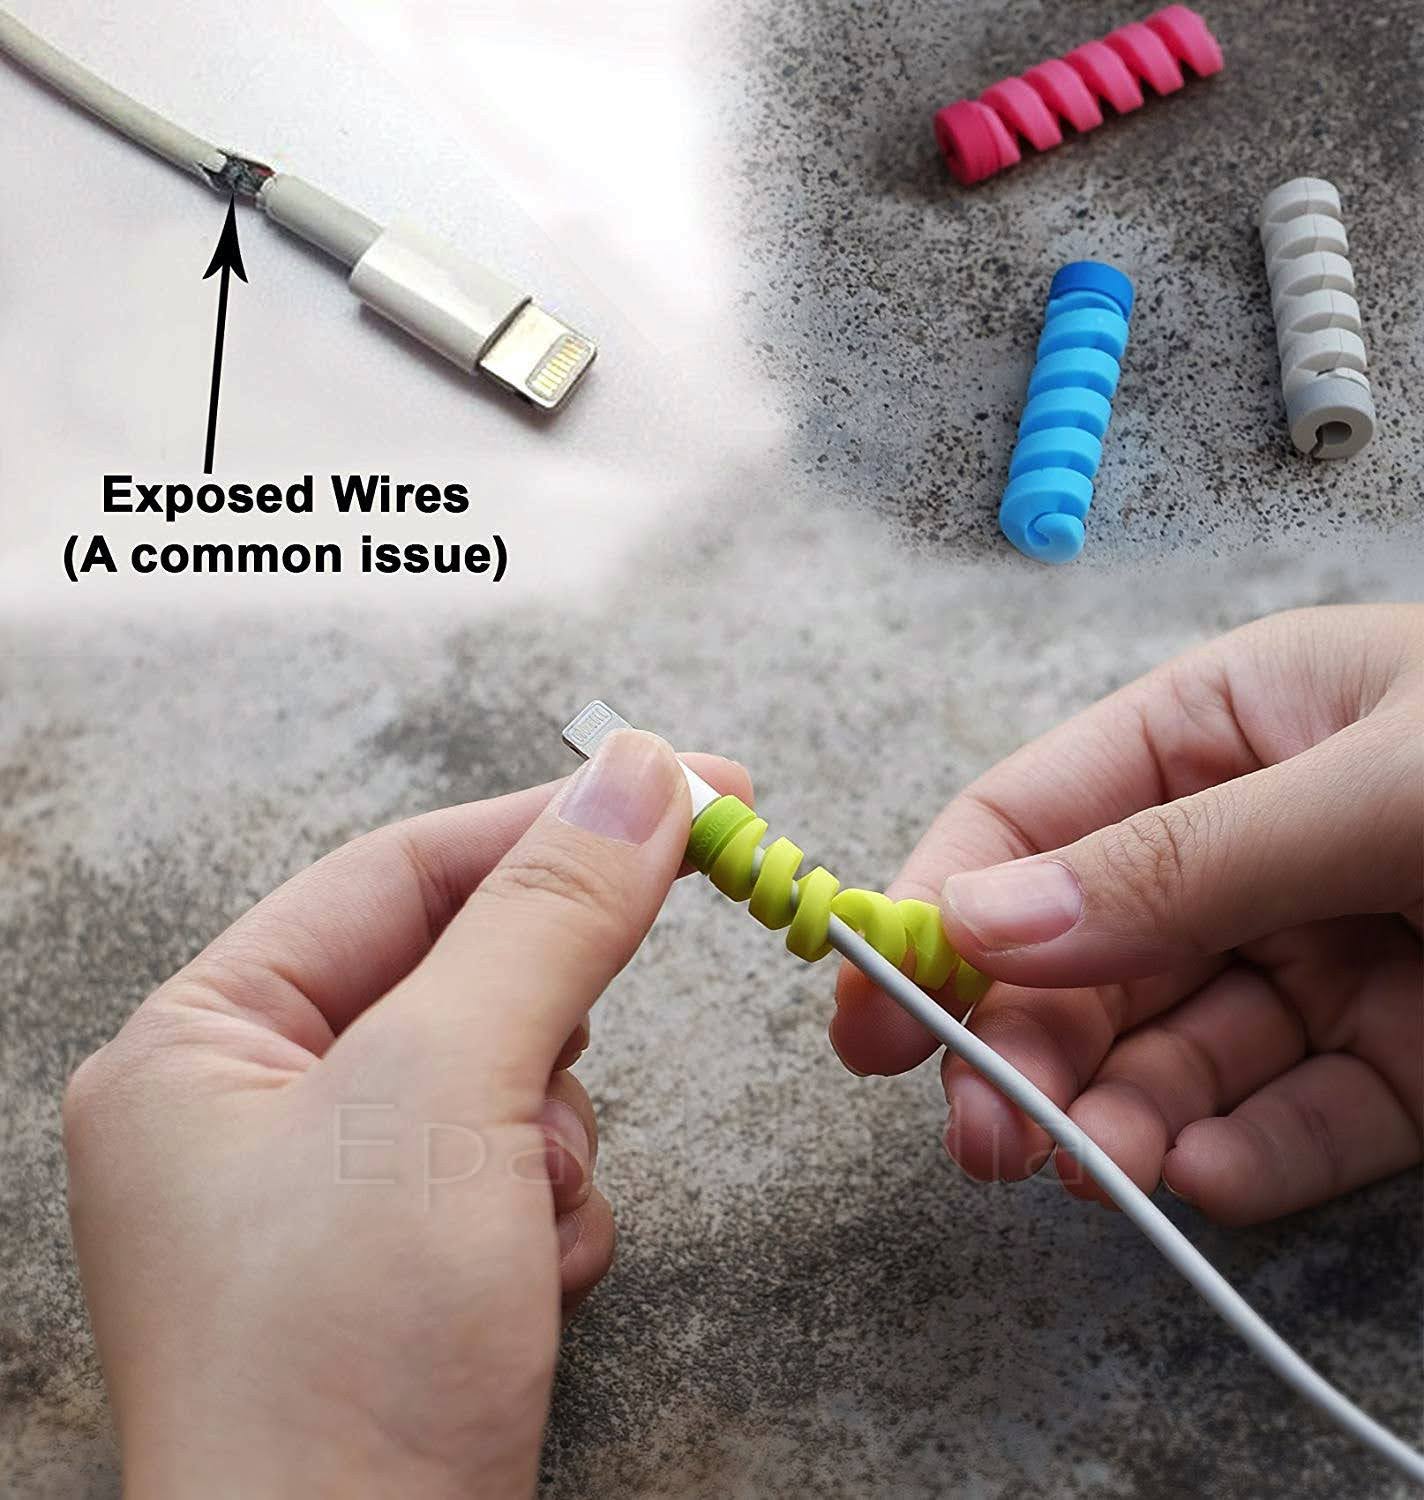 [Clearance] Set of 4 Spiral Cable Protector Winder Sleeves for Protecting Expensive Cables